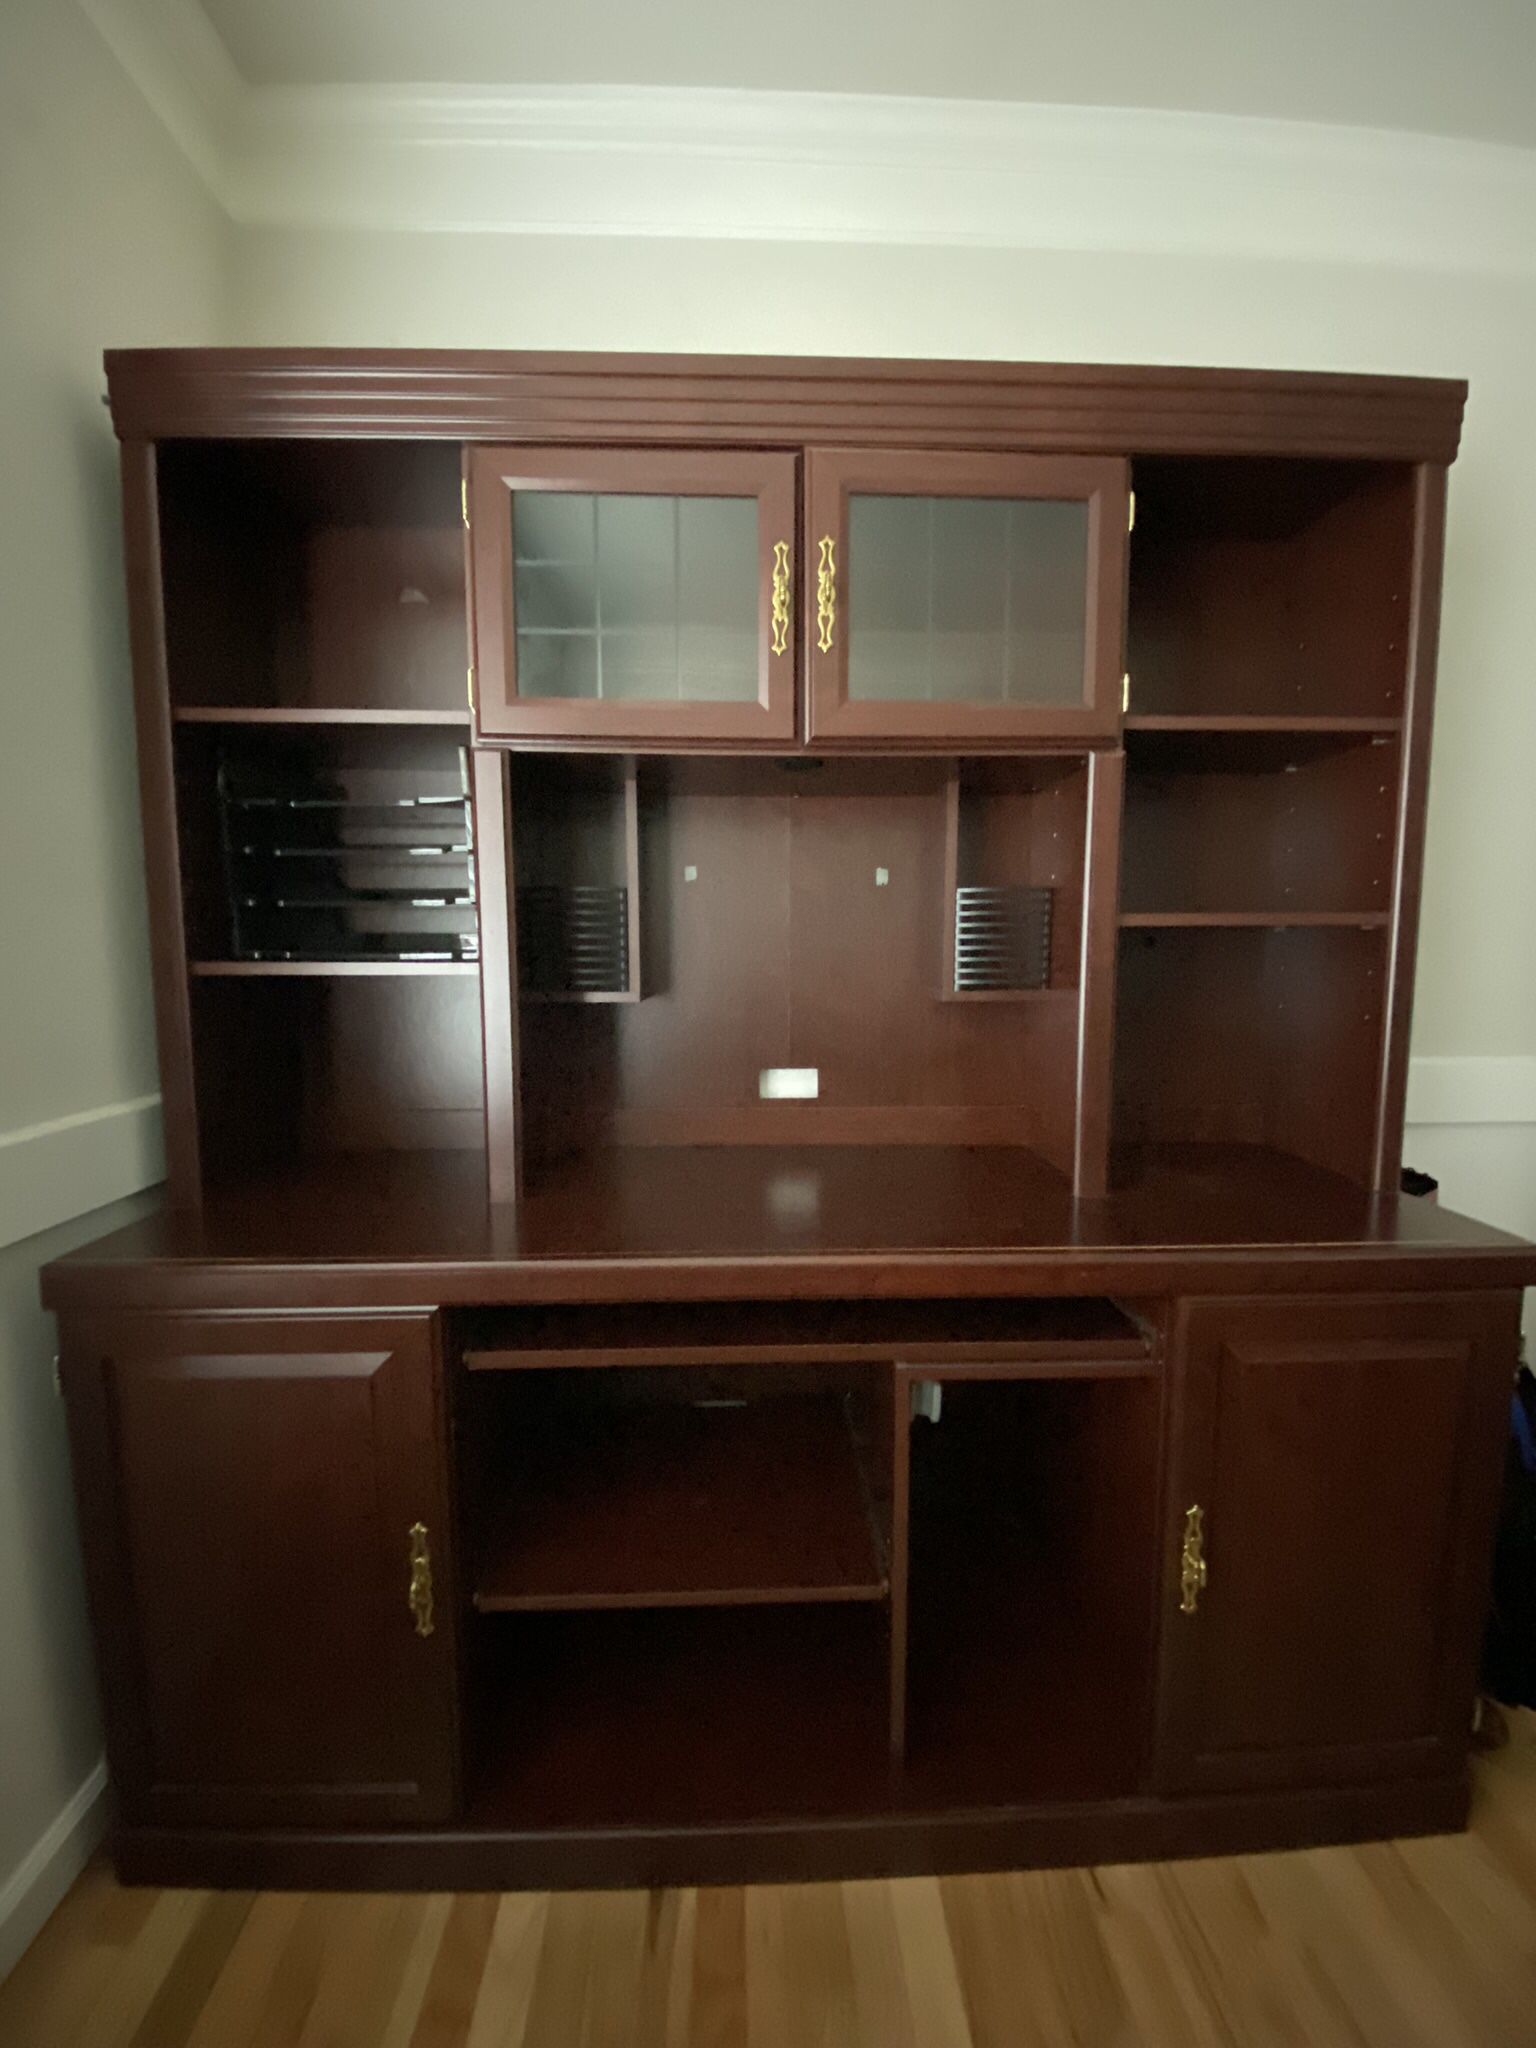 Computer Desk Station (65”x 21”x30”) With Hutch (65”x12”x41”) all In Burgundy Color 